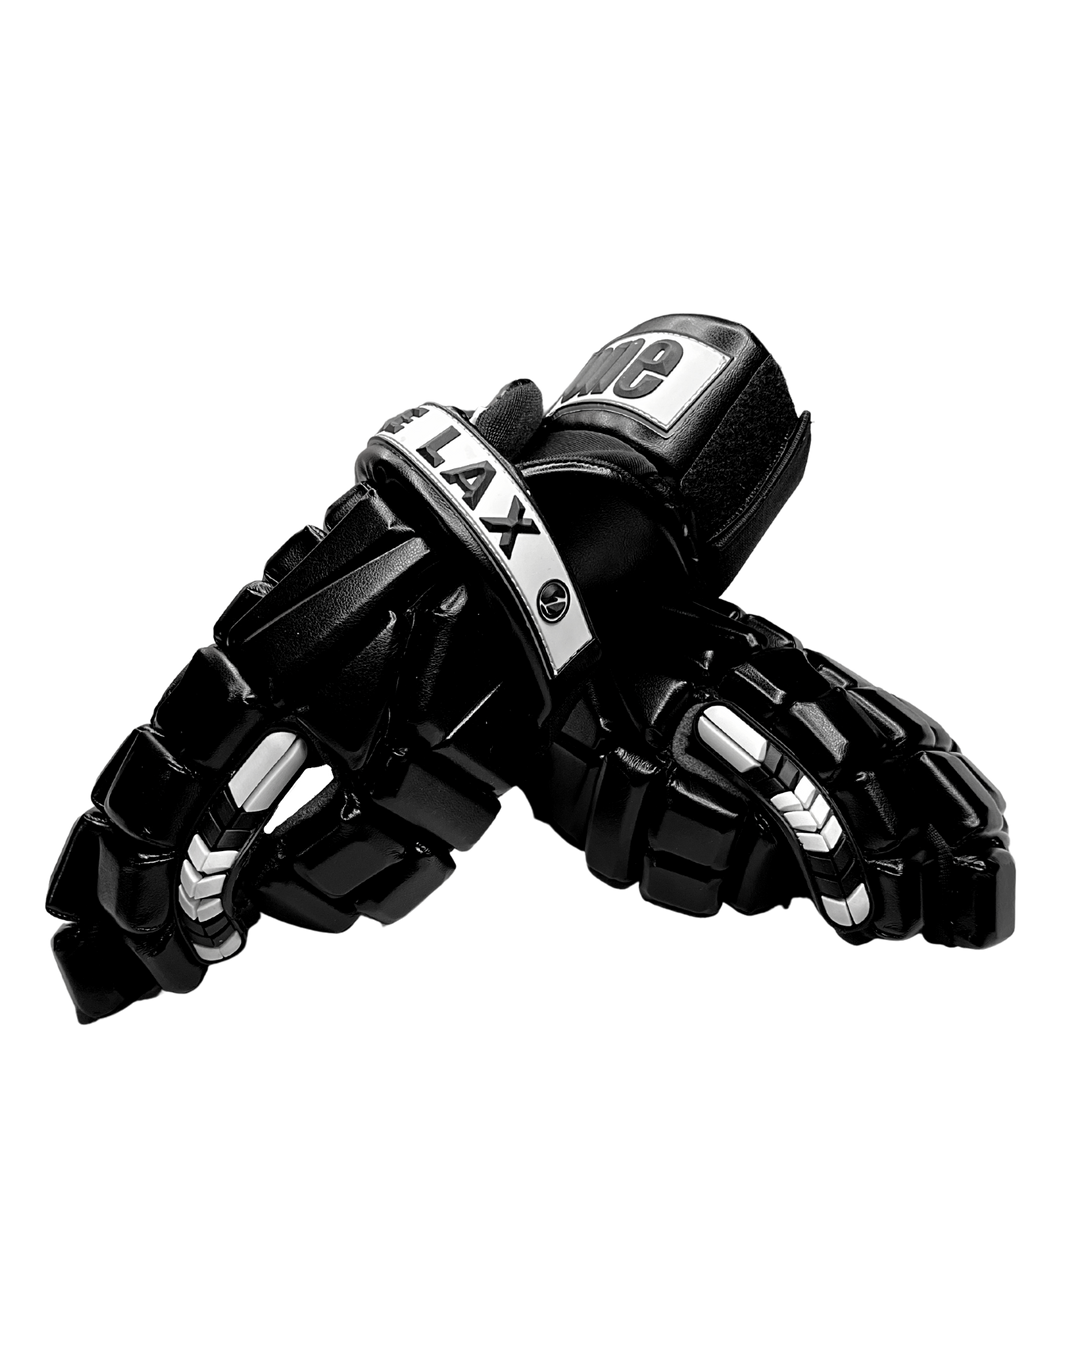 JR. 1 Gloves in Black | 2 Kids Sizes Available | HYBRID Box & Field Lacrosse Gloves - One Lax